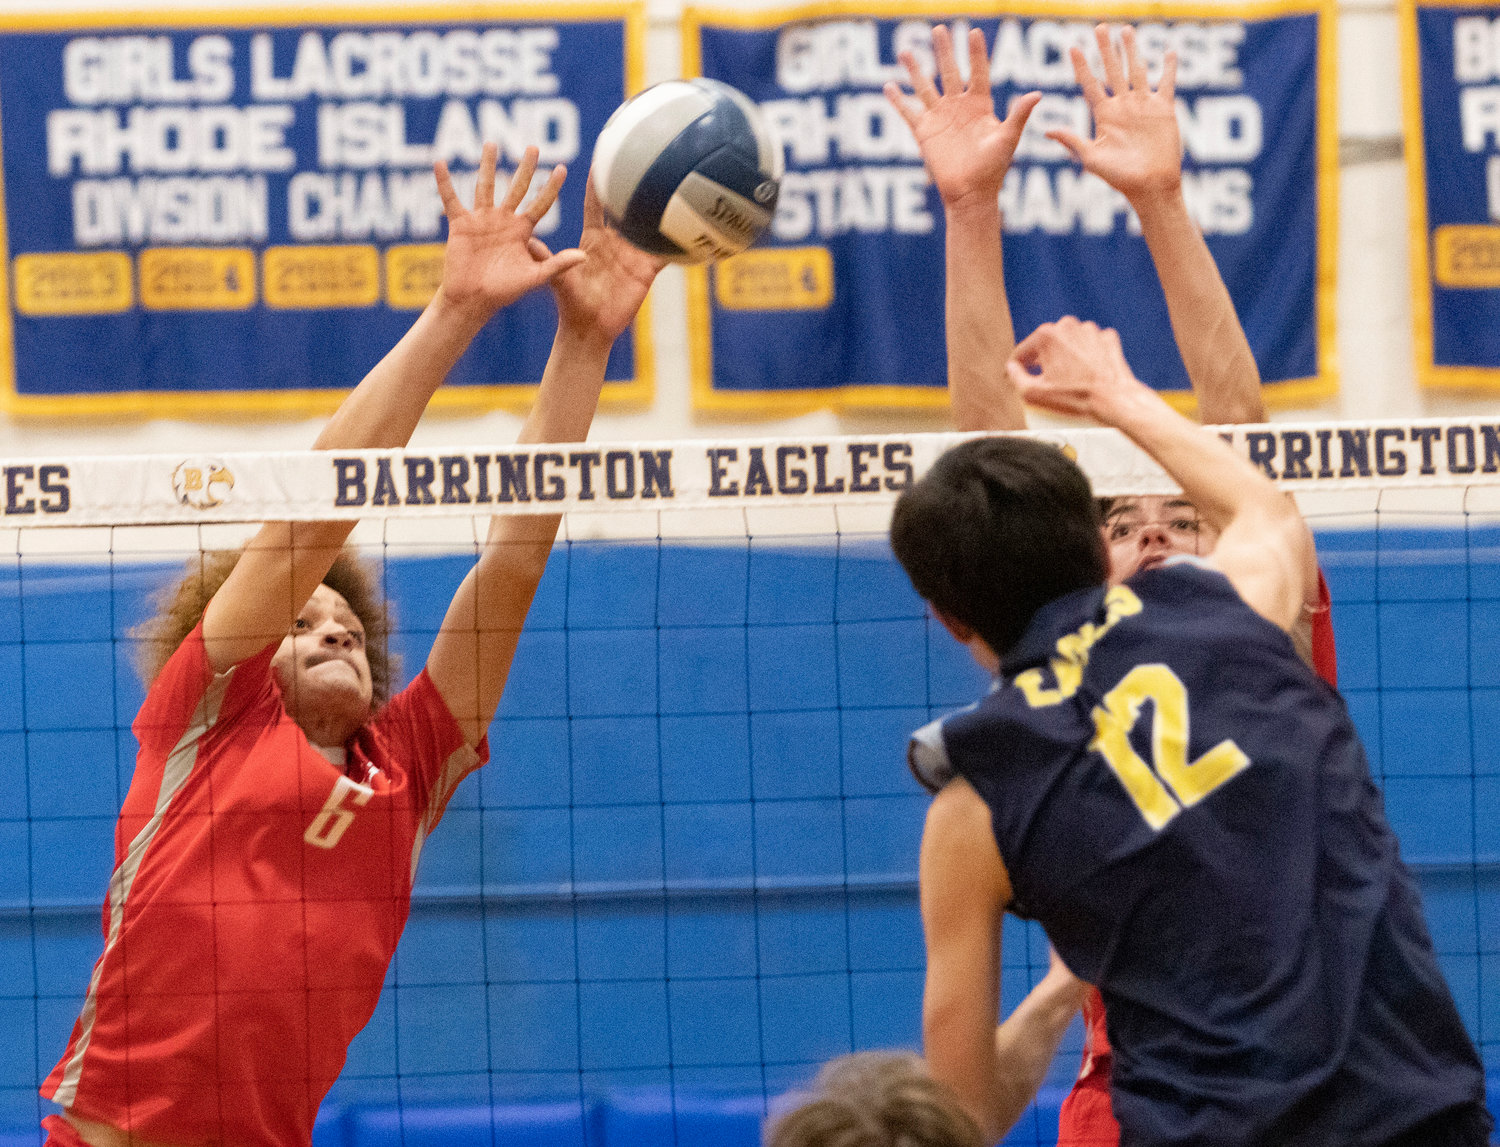 East Providence High School’s Franklin Carela Lopez (left) and Brett Schwab block a shot attempt by Barrington during the Division II boys’ volleyball match hosted by the neighboring Eagles Thursday night, May 5.